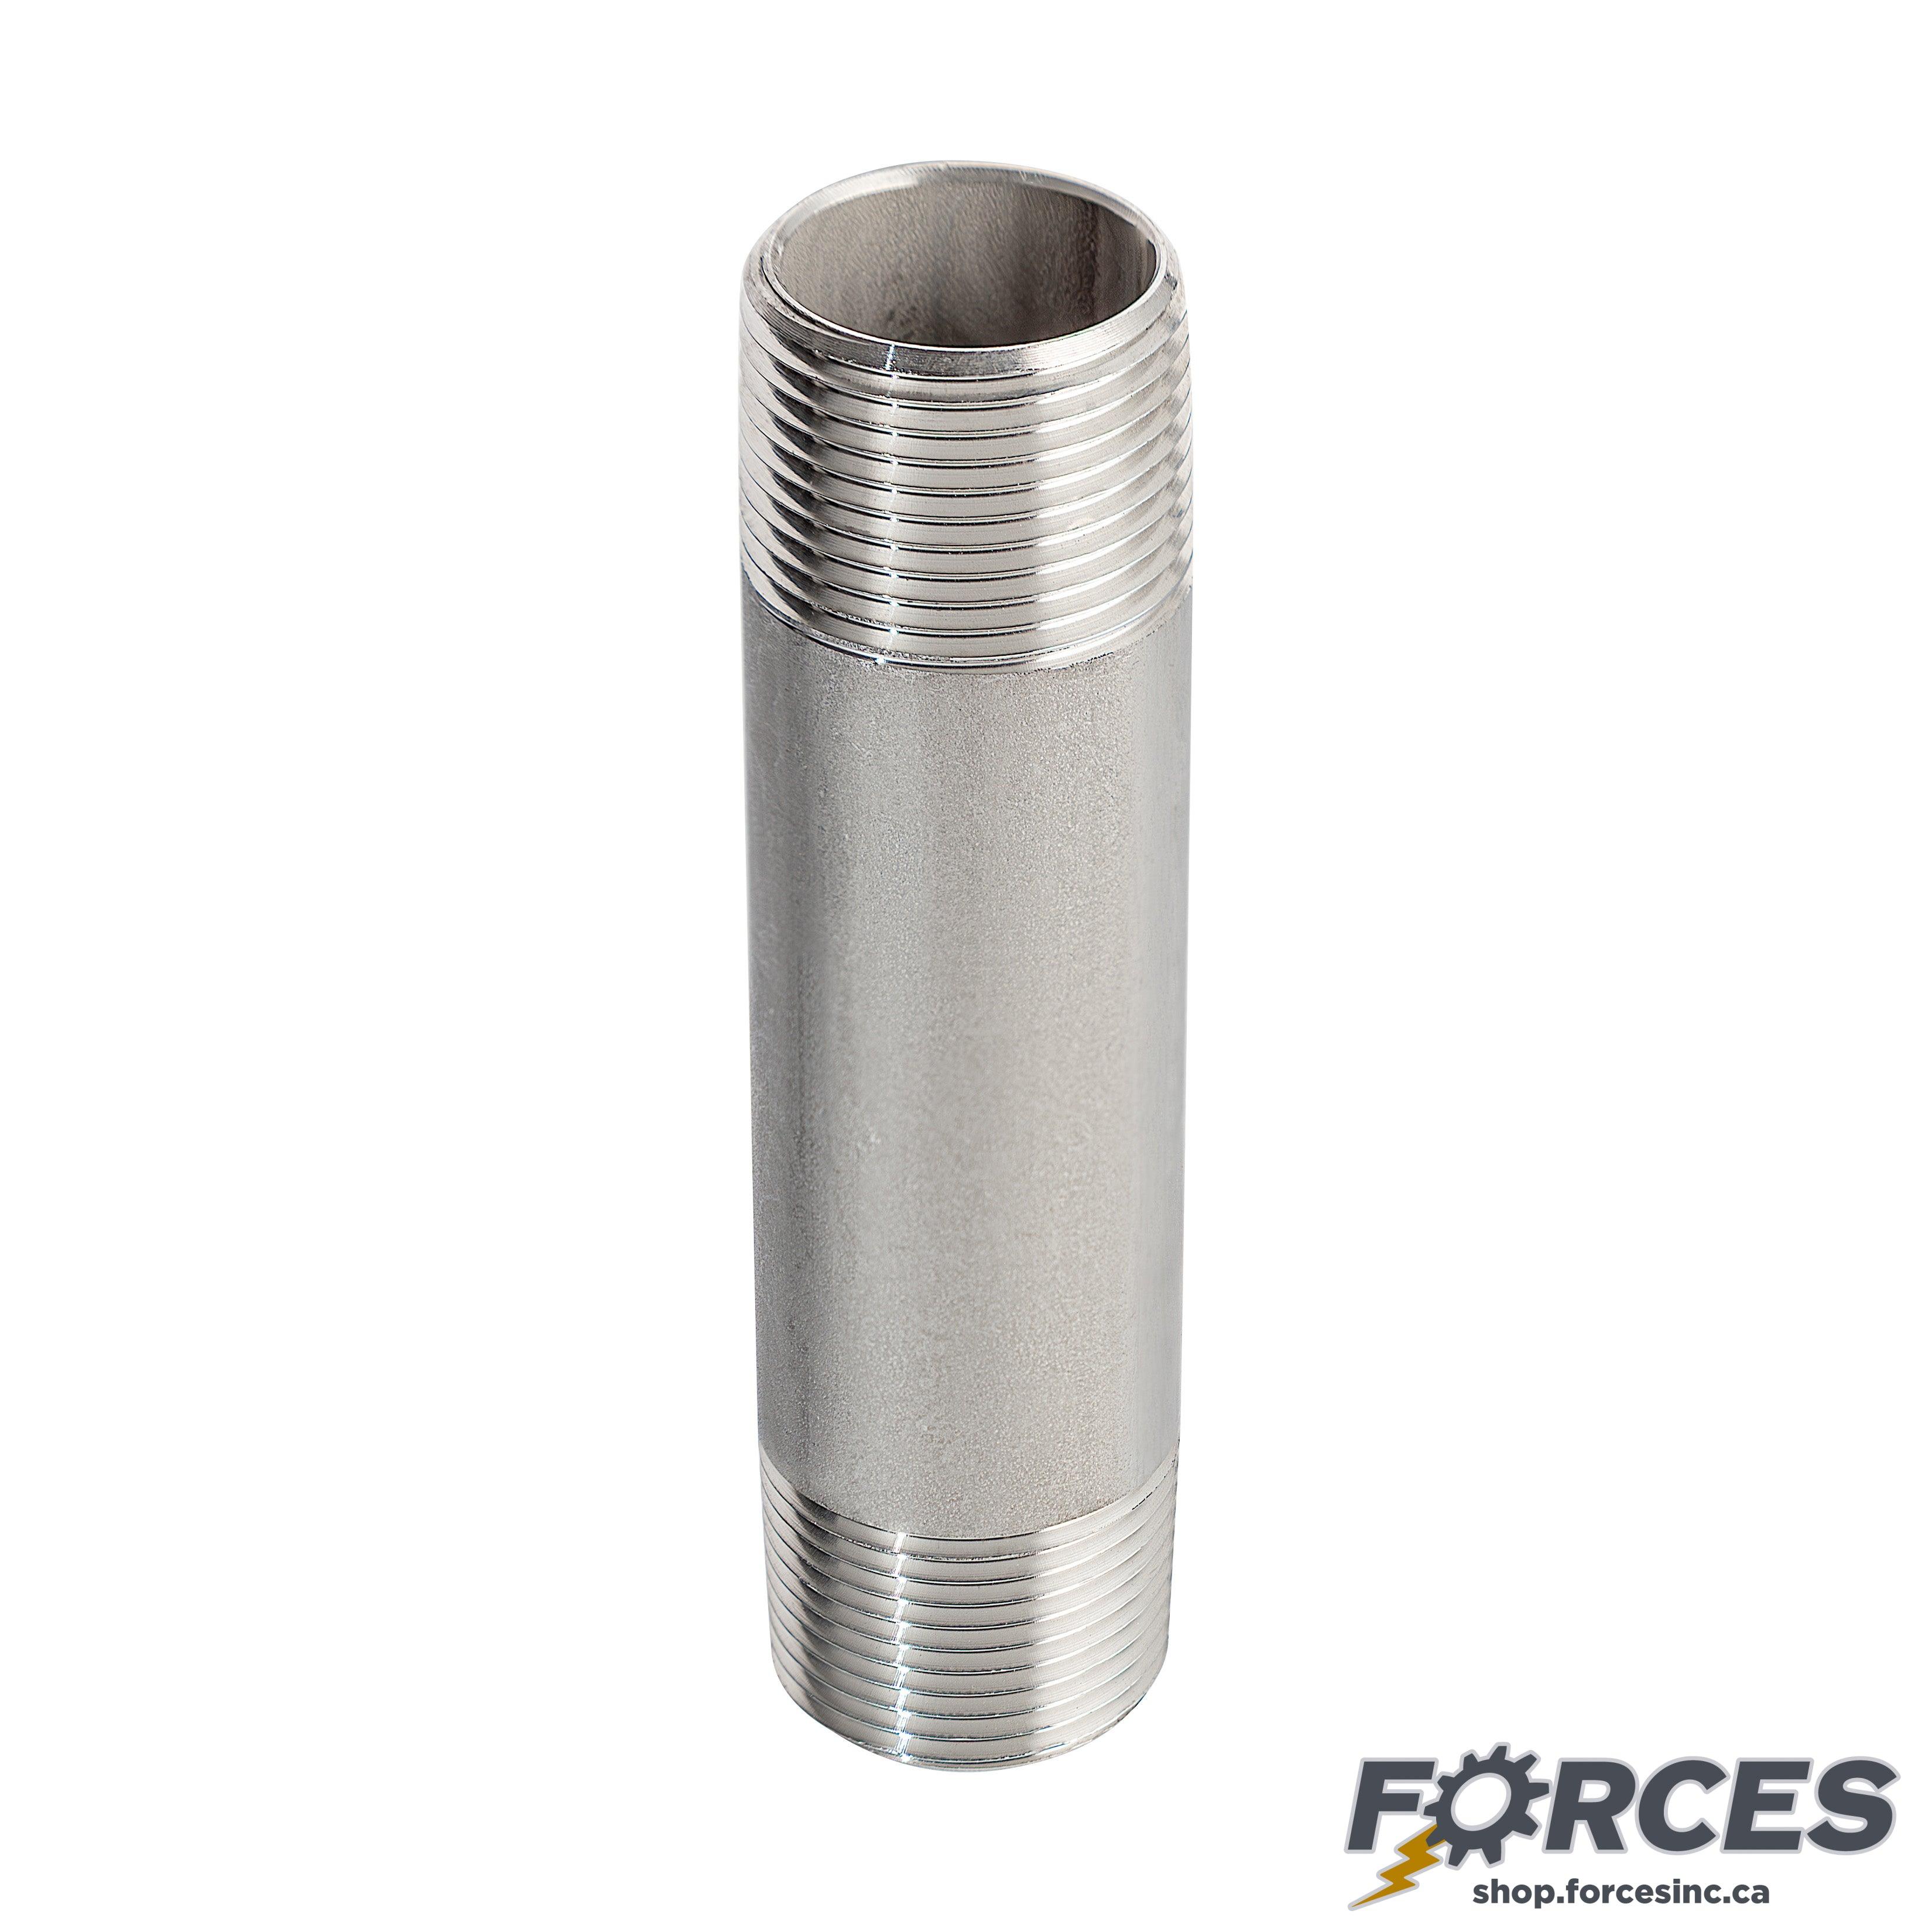 1-1/2" X 6" Long Nipple - Stainless Steel 316 - Forces Inc